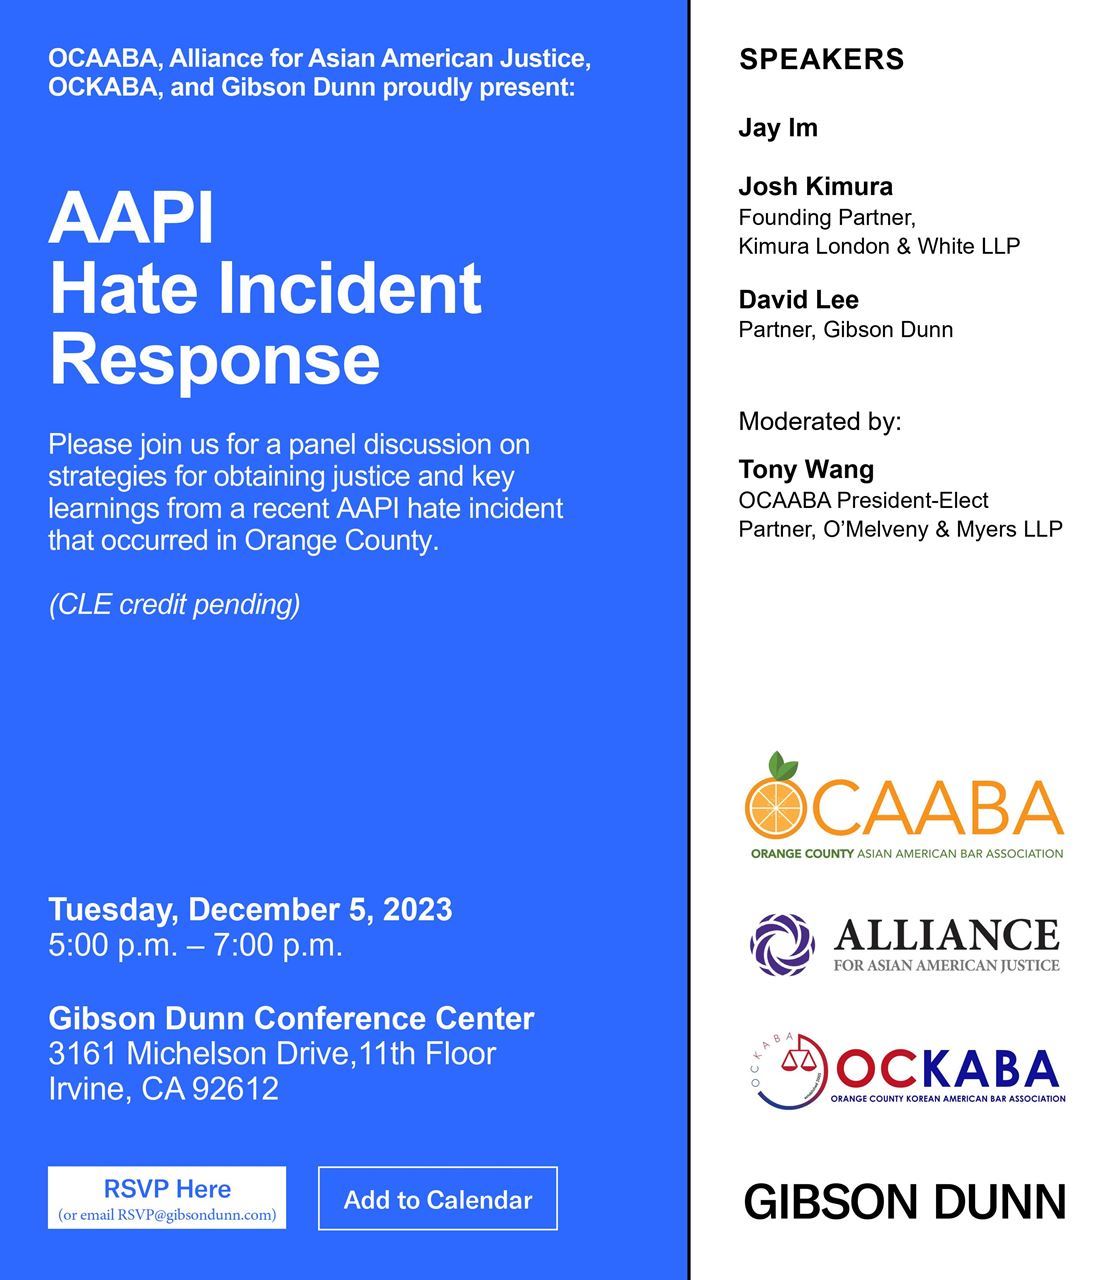 OCAABA, Alliance for Asian American Justice, OCKABA, and Gibson Dunn Proudly present: AAPI Hate Incident Response. Please join us for a panel discussion on strategies for obtaining justice and key learnings from a recent AAPI hate incident that occured in Orange County. CLE Credit Pending. Speakers: Jay Im, Josh Kimura: Founding Partner, Kimura London & White LLP, David Lee: Partner, Gibson Dunn. Moderated by Tony Wang: OCAABA President Elect and Partner O'Melveny & Meyers LLP